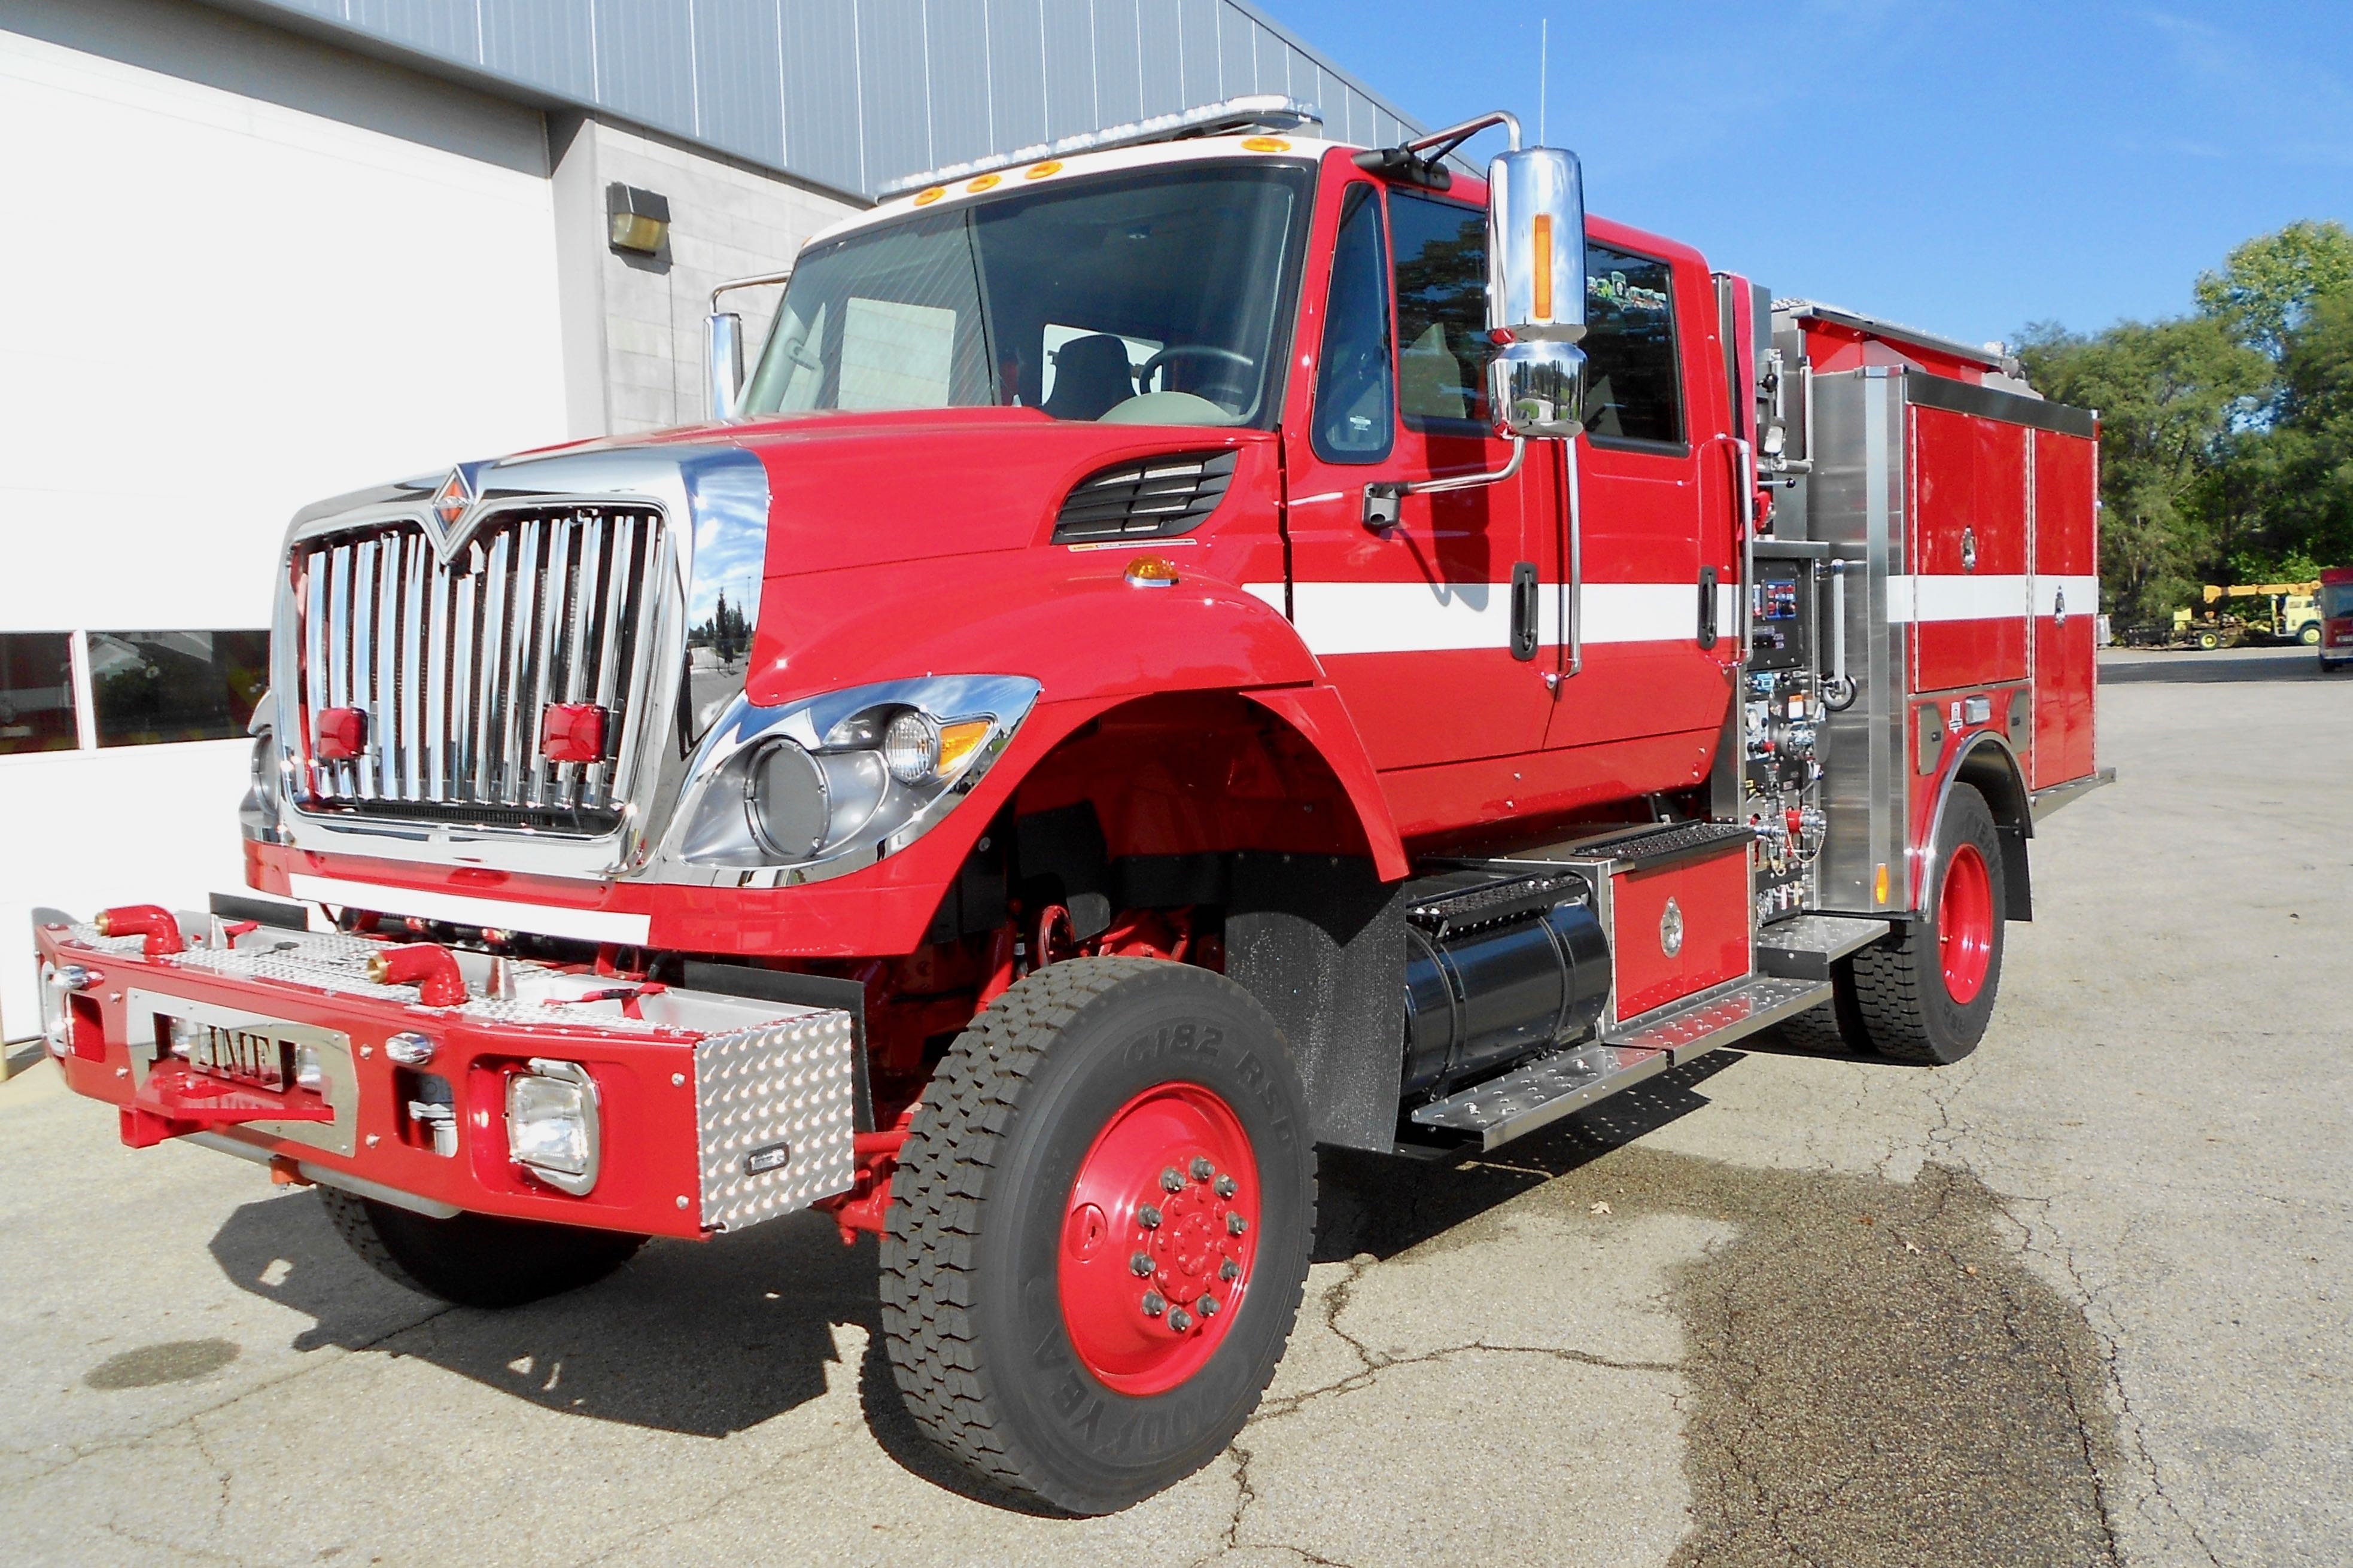 Lake County Fire Protection District, CA – #22488